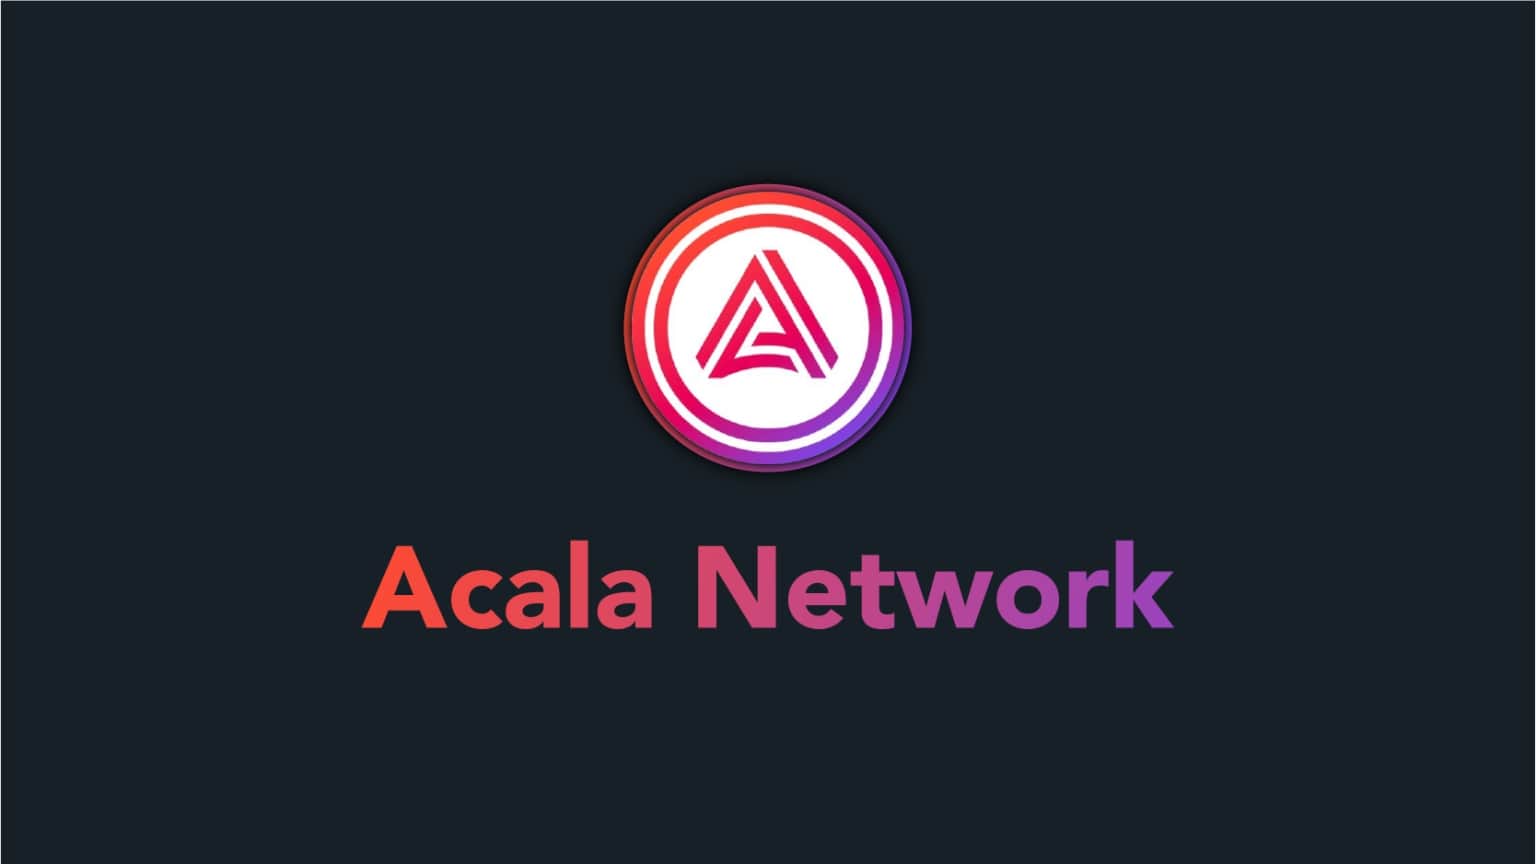 Alcala-resumes-operations-after-printing-over-$3-billion-in-stablecoins-by-mistake